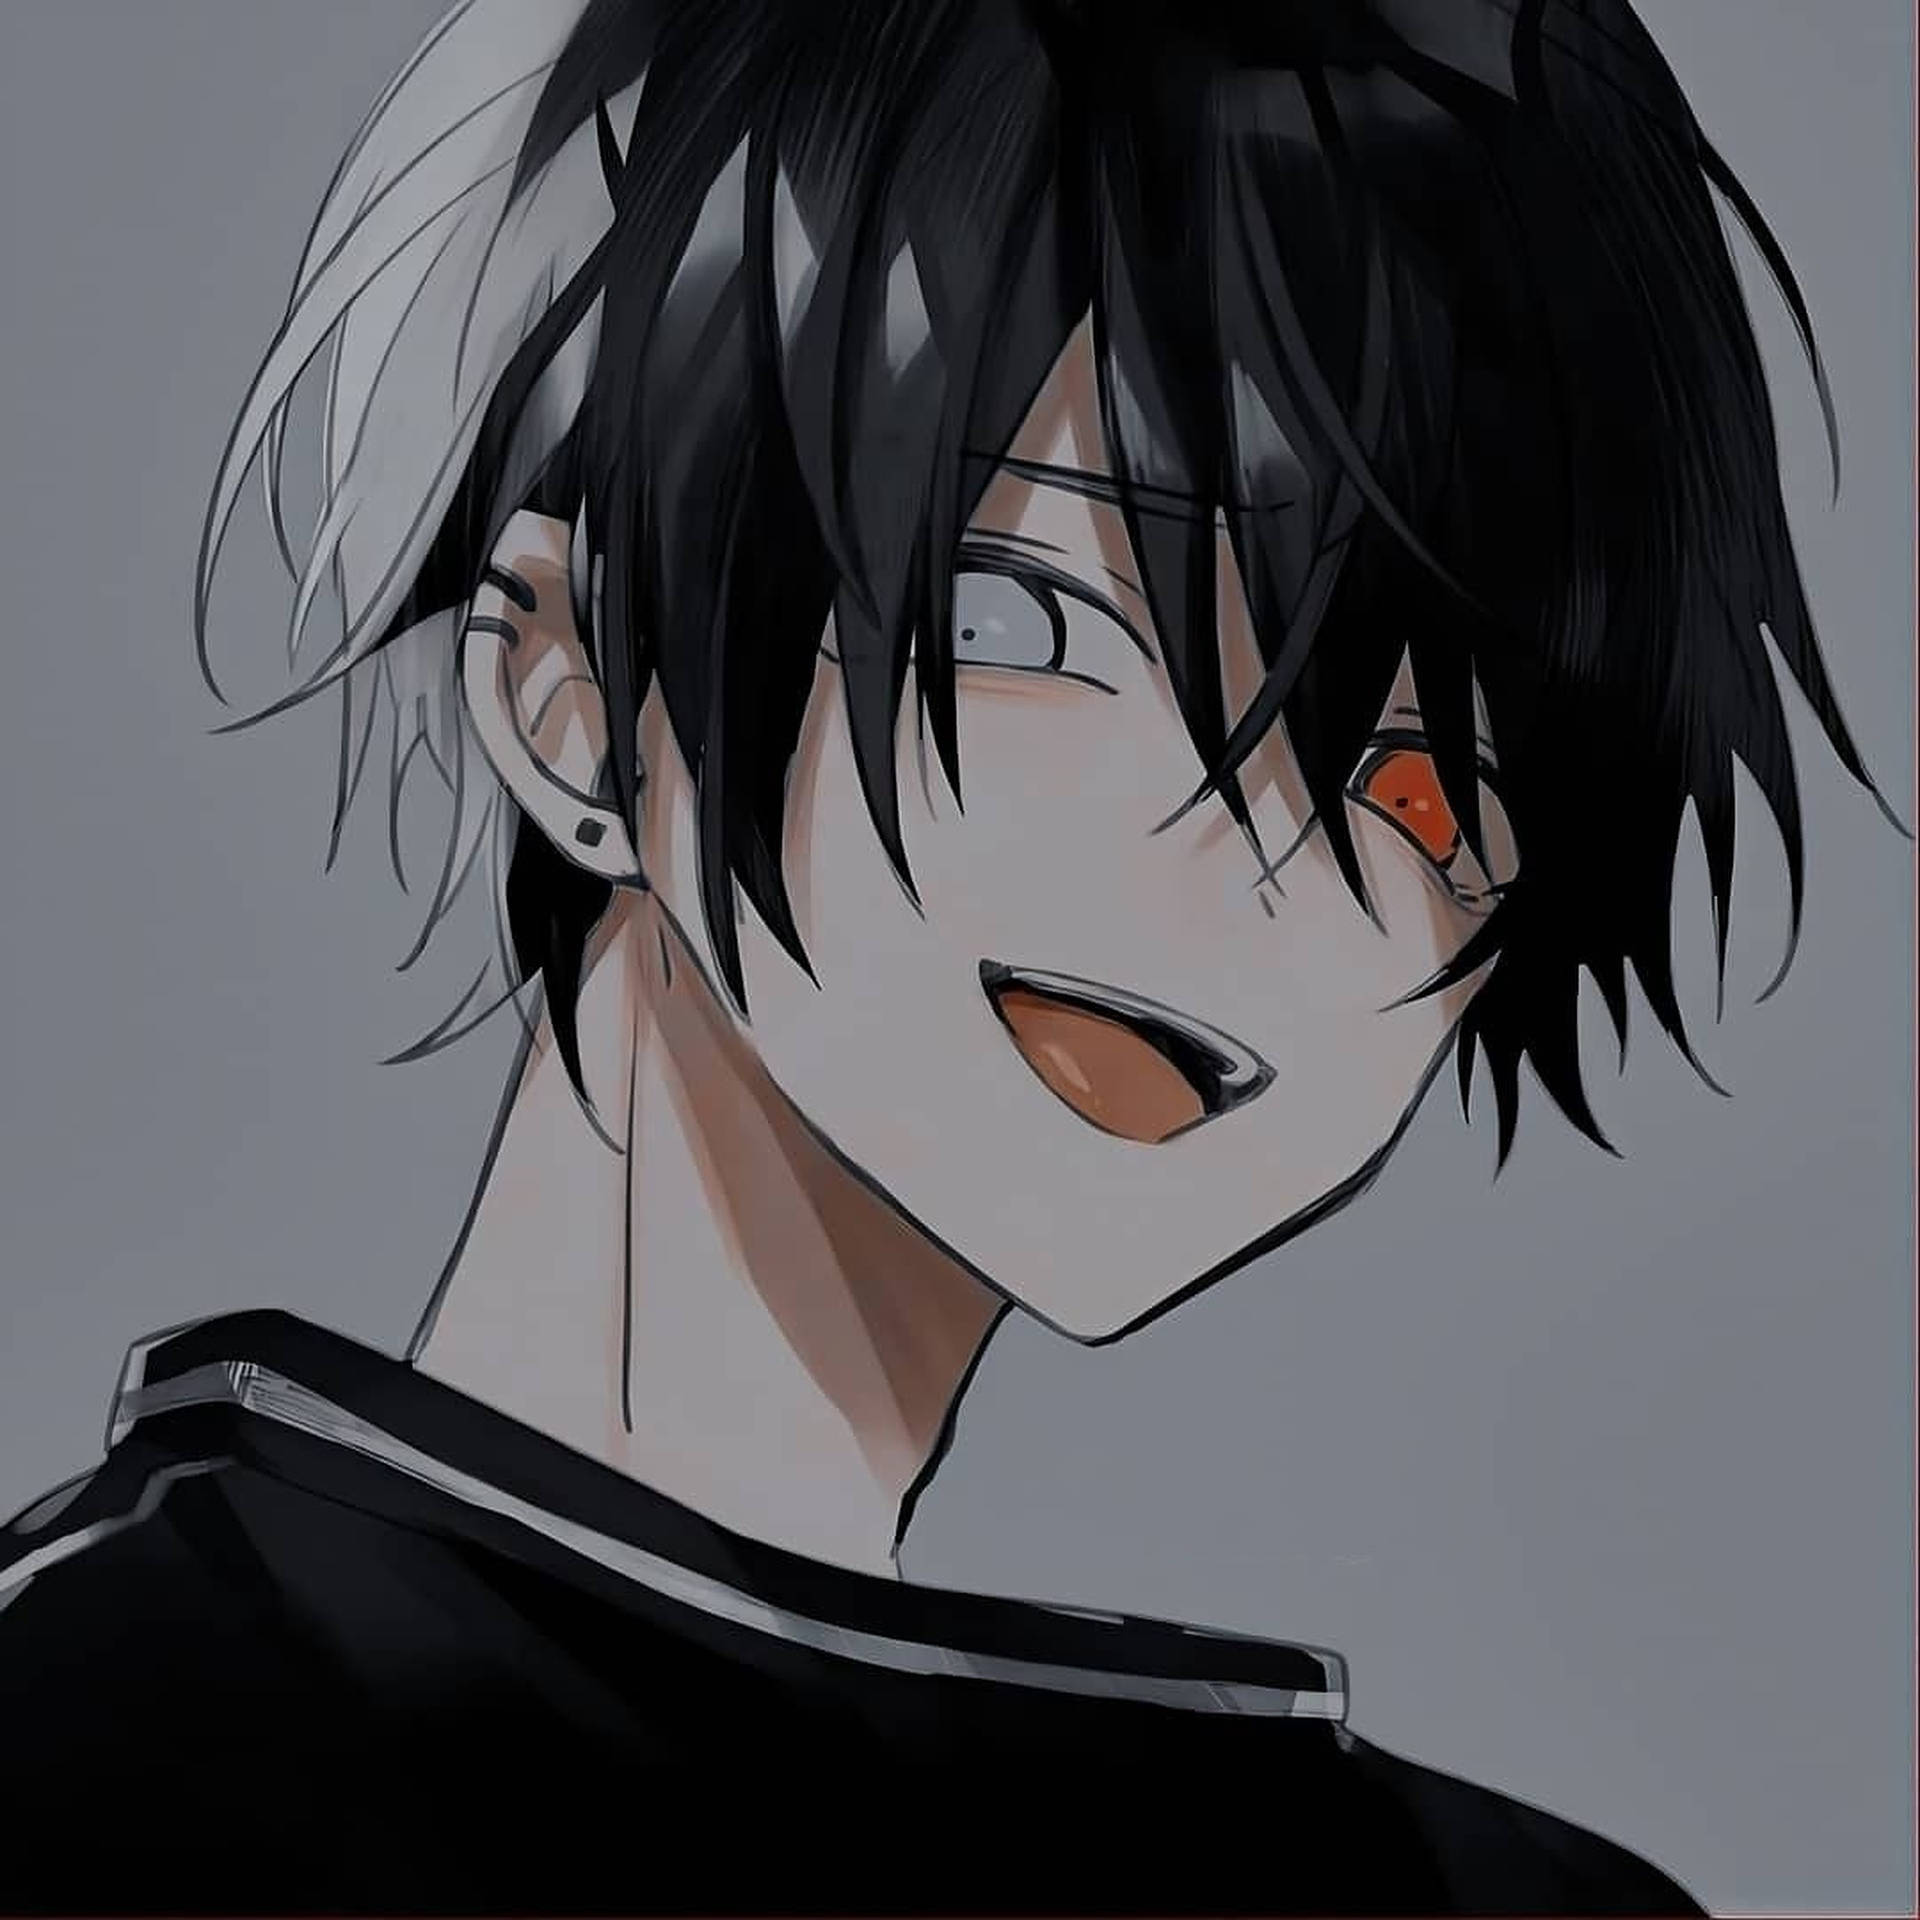 Download Black Haired Guy Anime Pfp Wallpaper | Wallpapers.Com